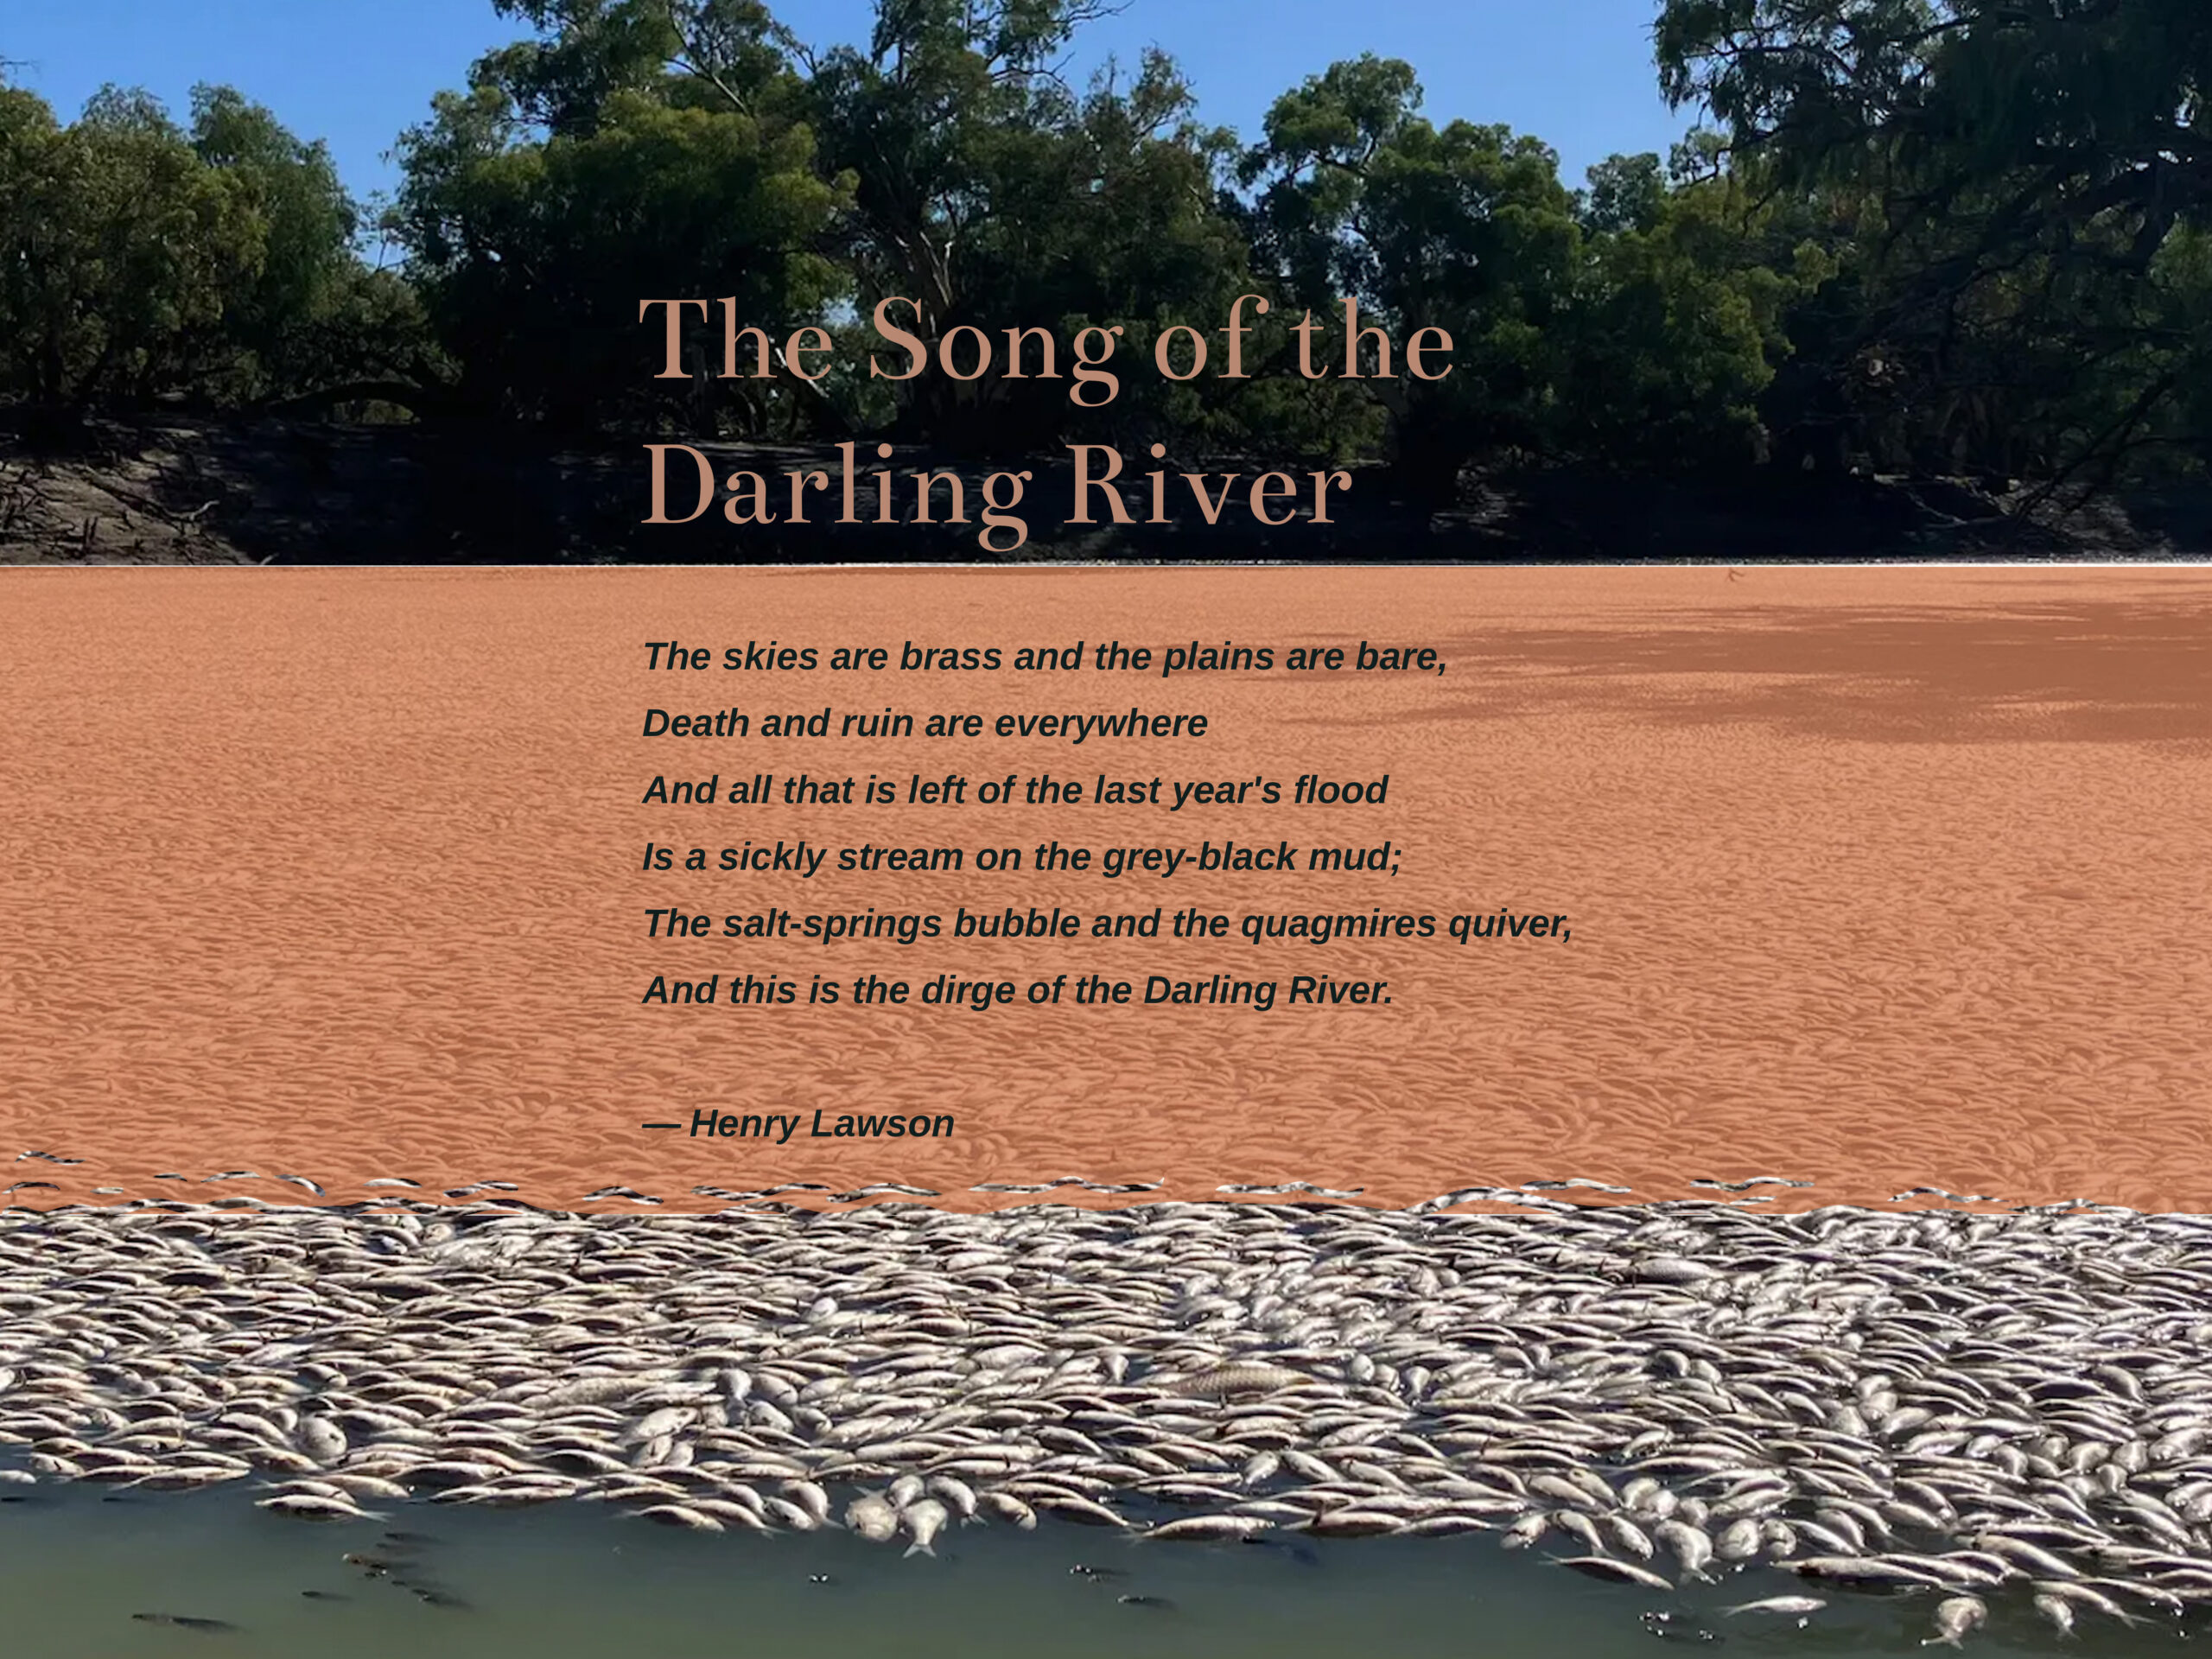 The Song of the Darling River